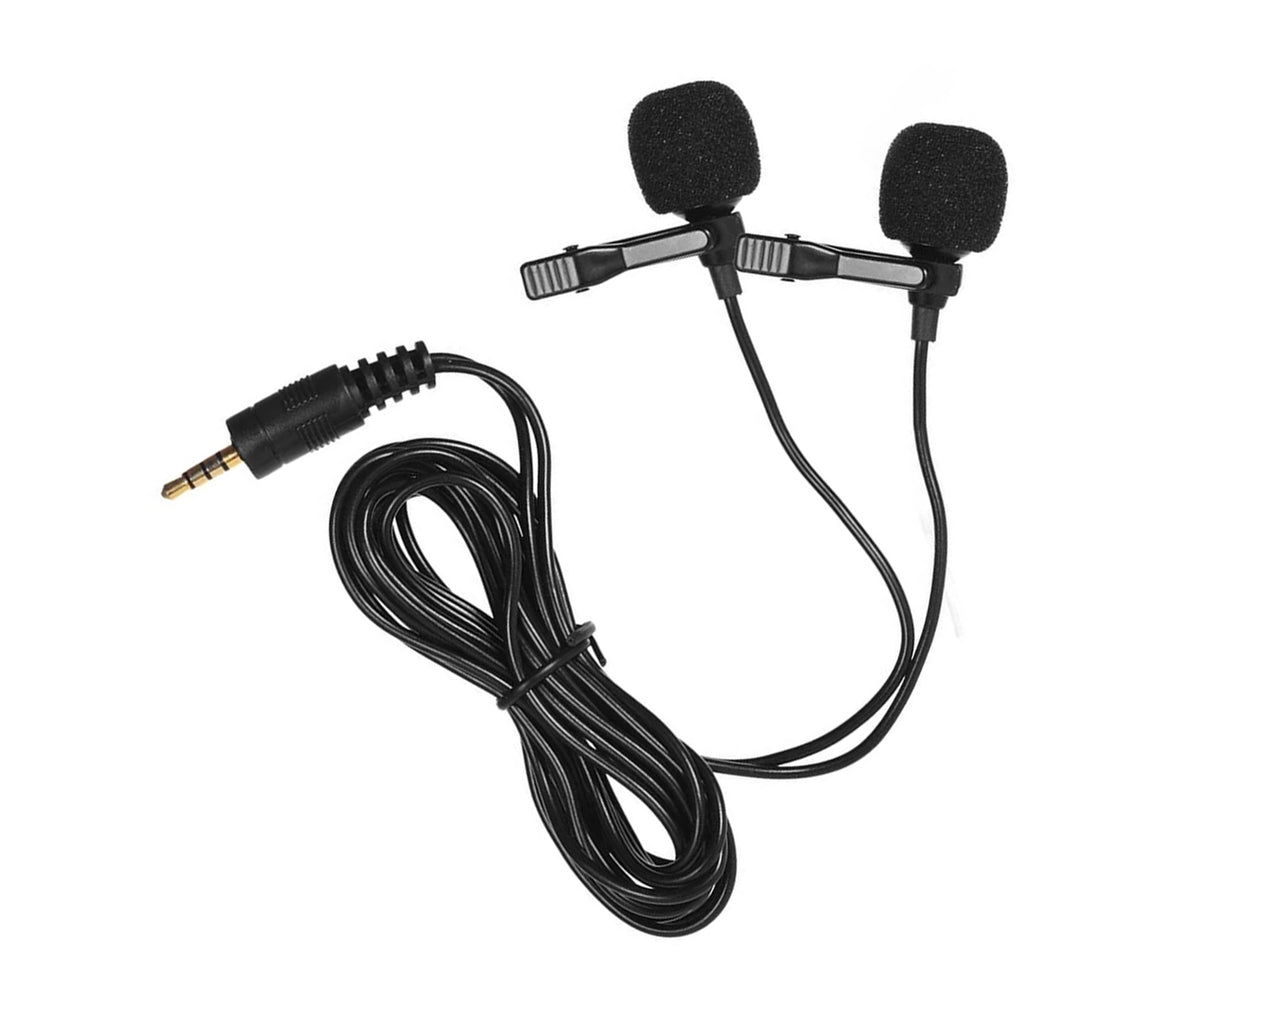 Dual Omni-Directional Lapel Lavalier Microphone for Smartphones 3.5mm Jack TMMB02